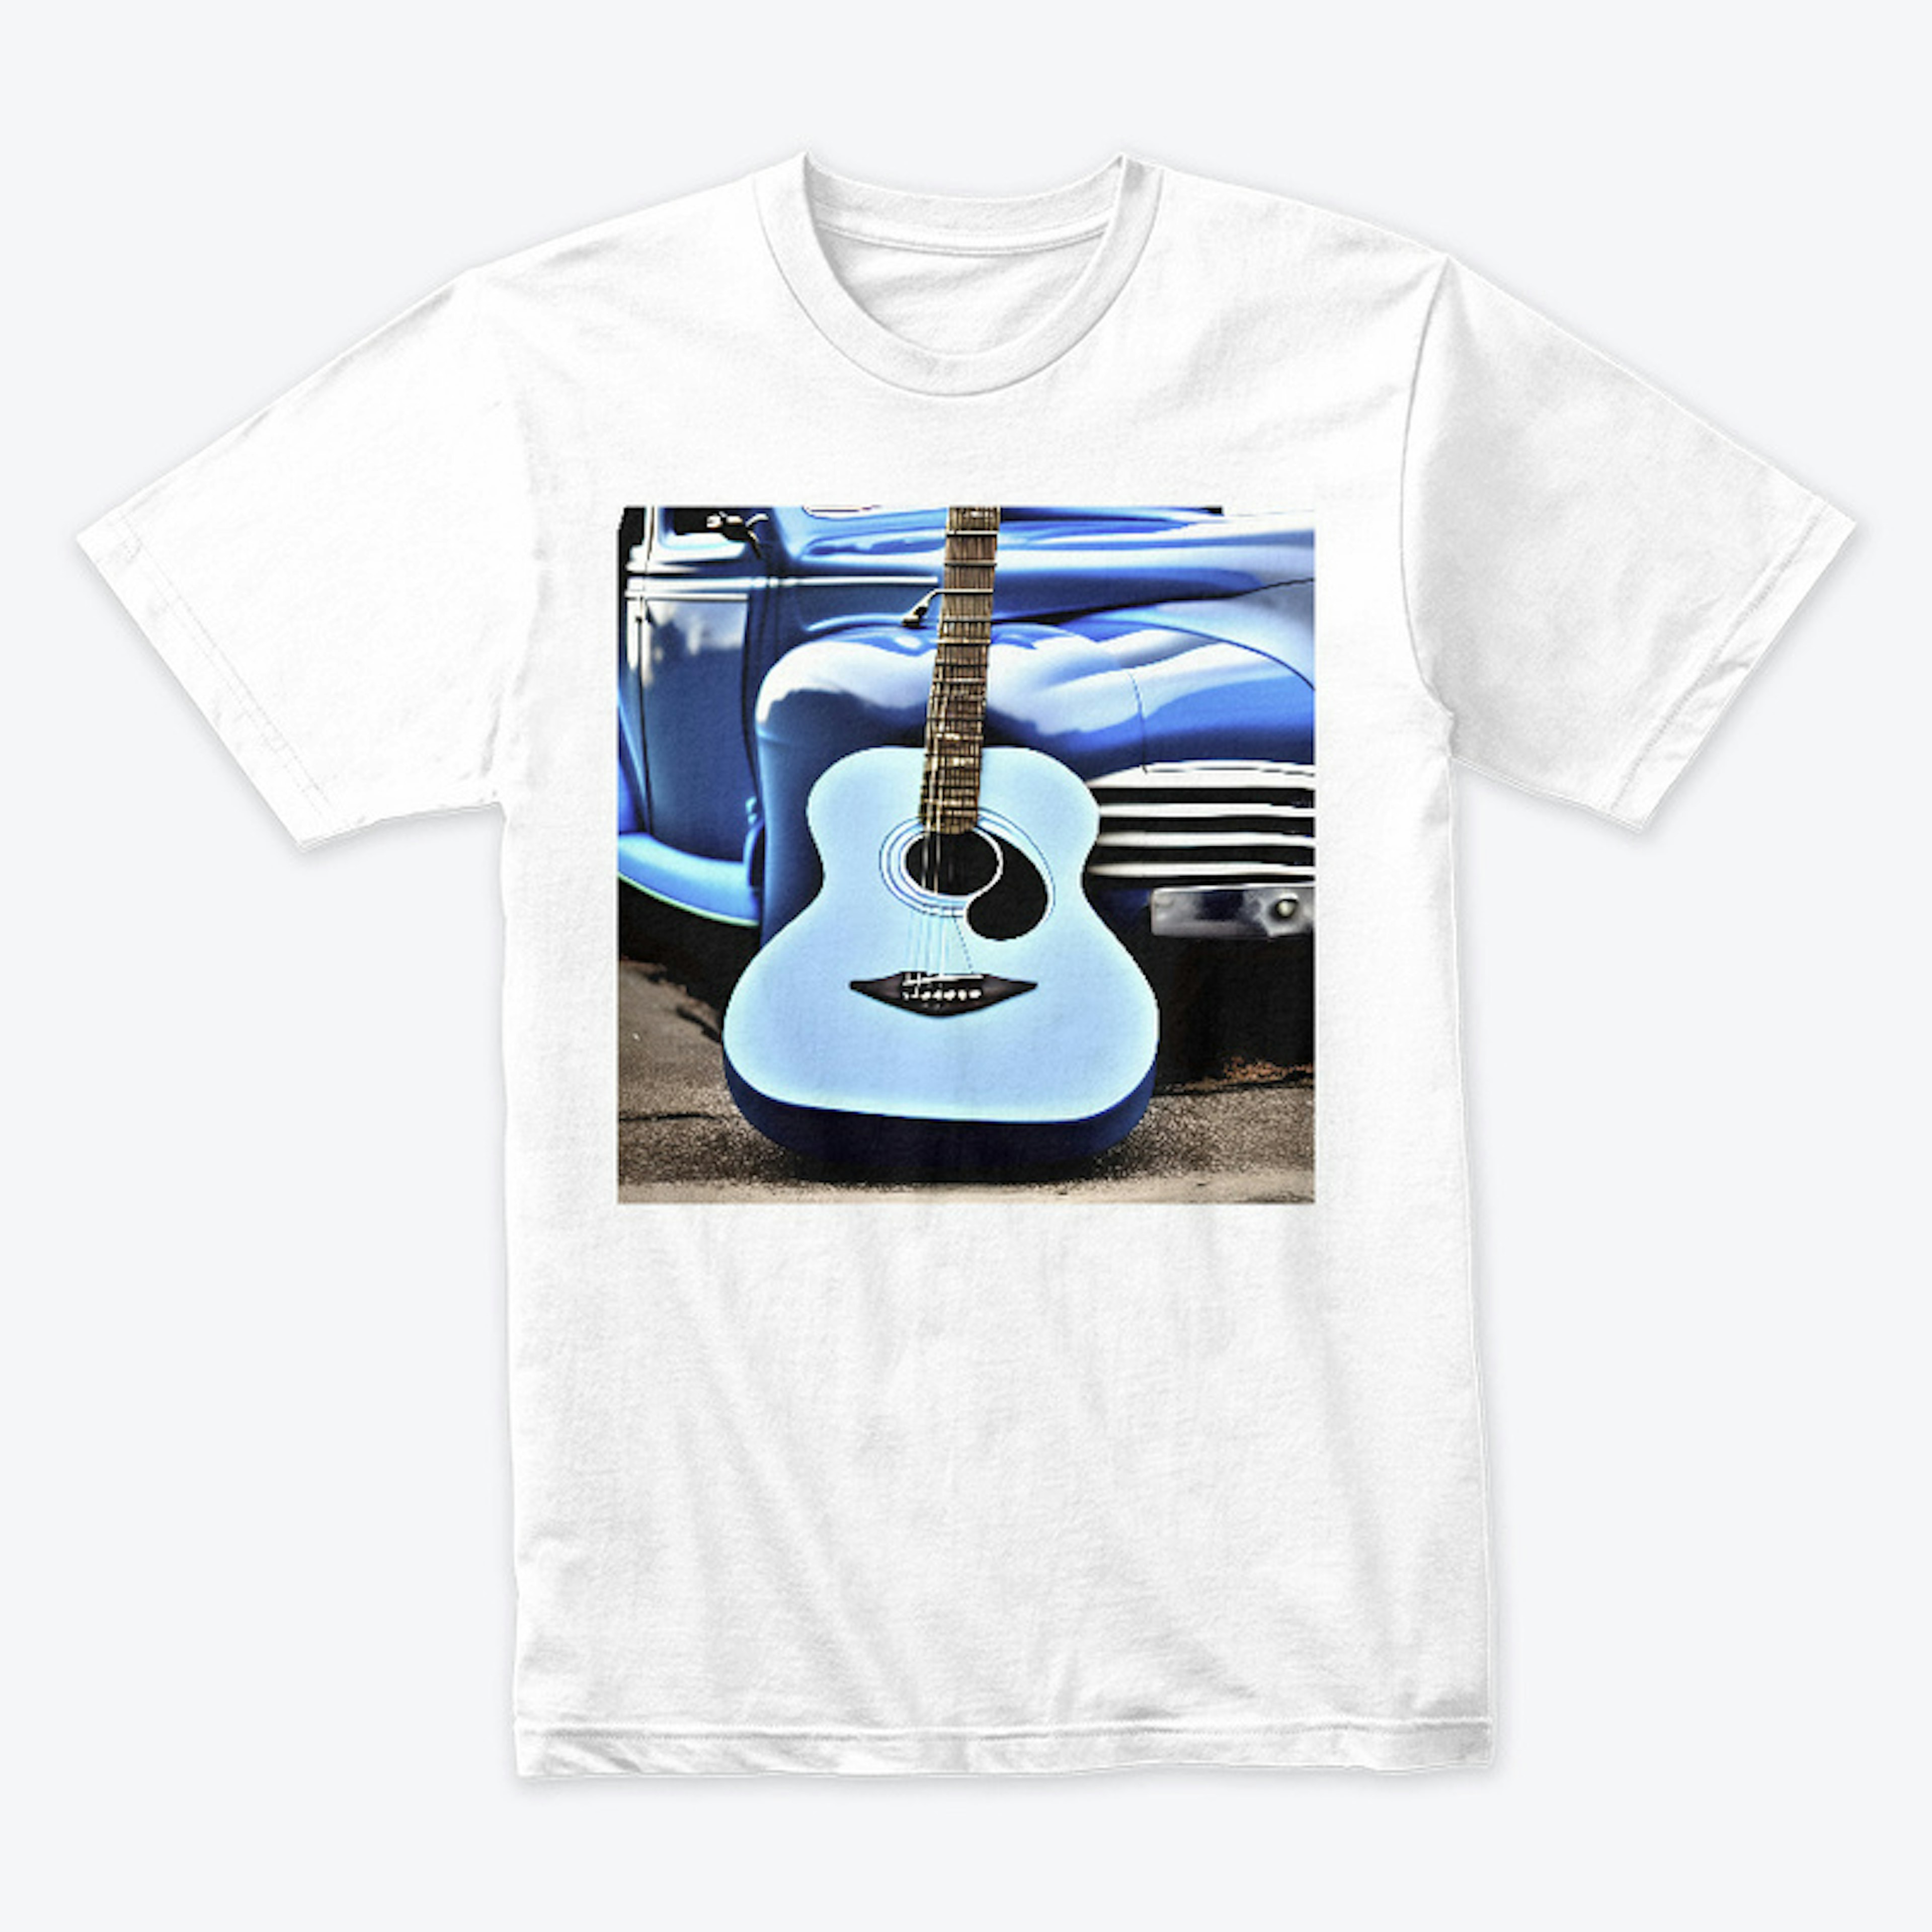 The Guitars and Cars Collection